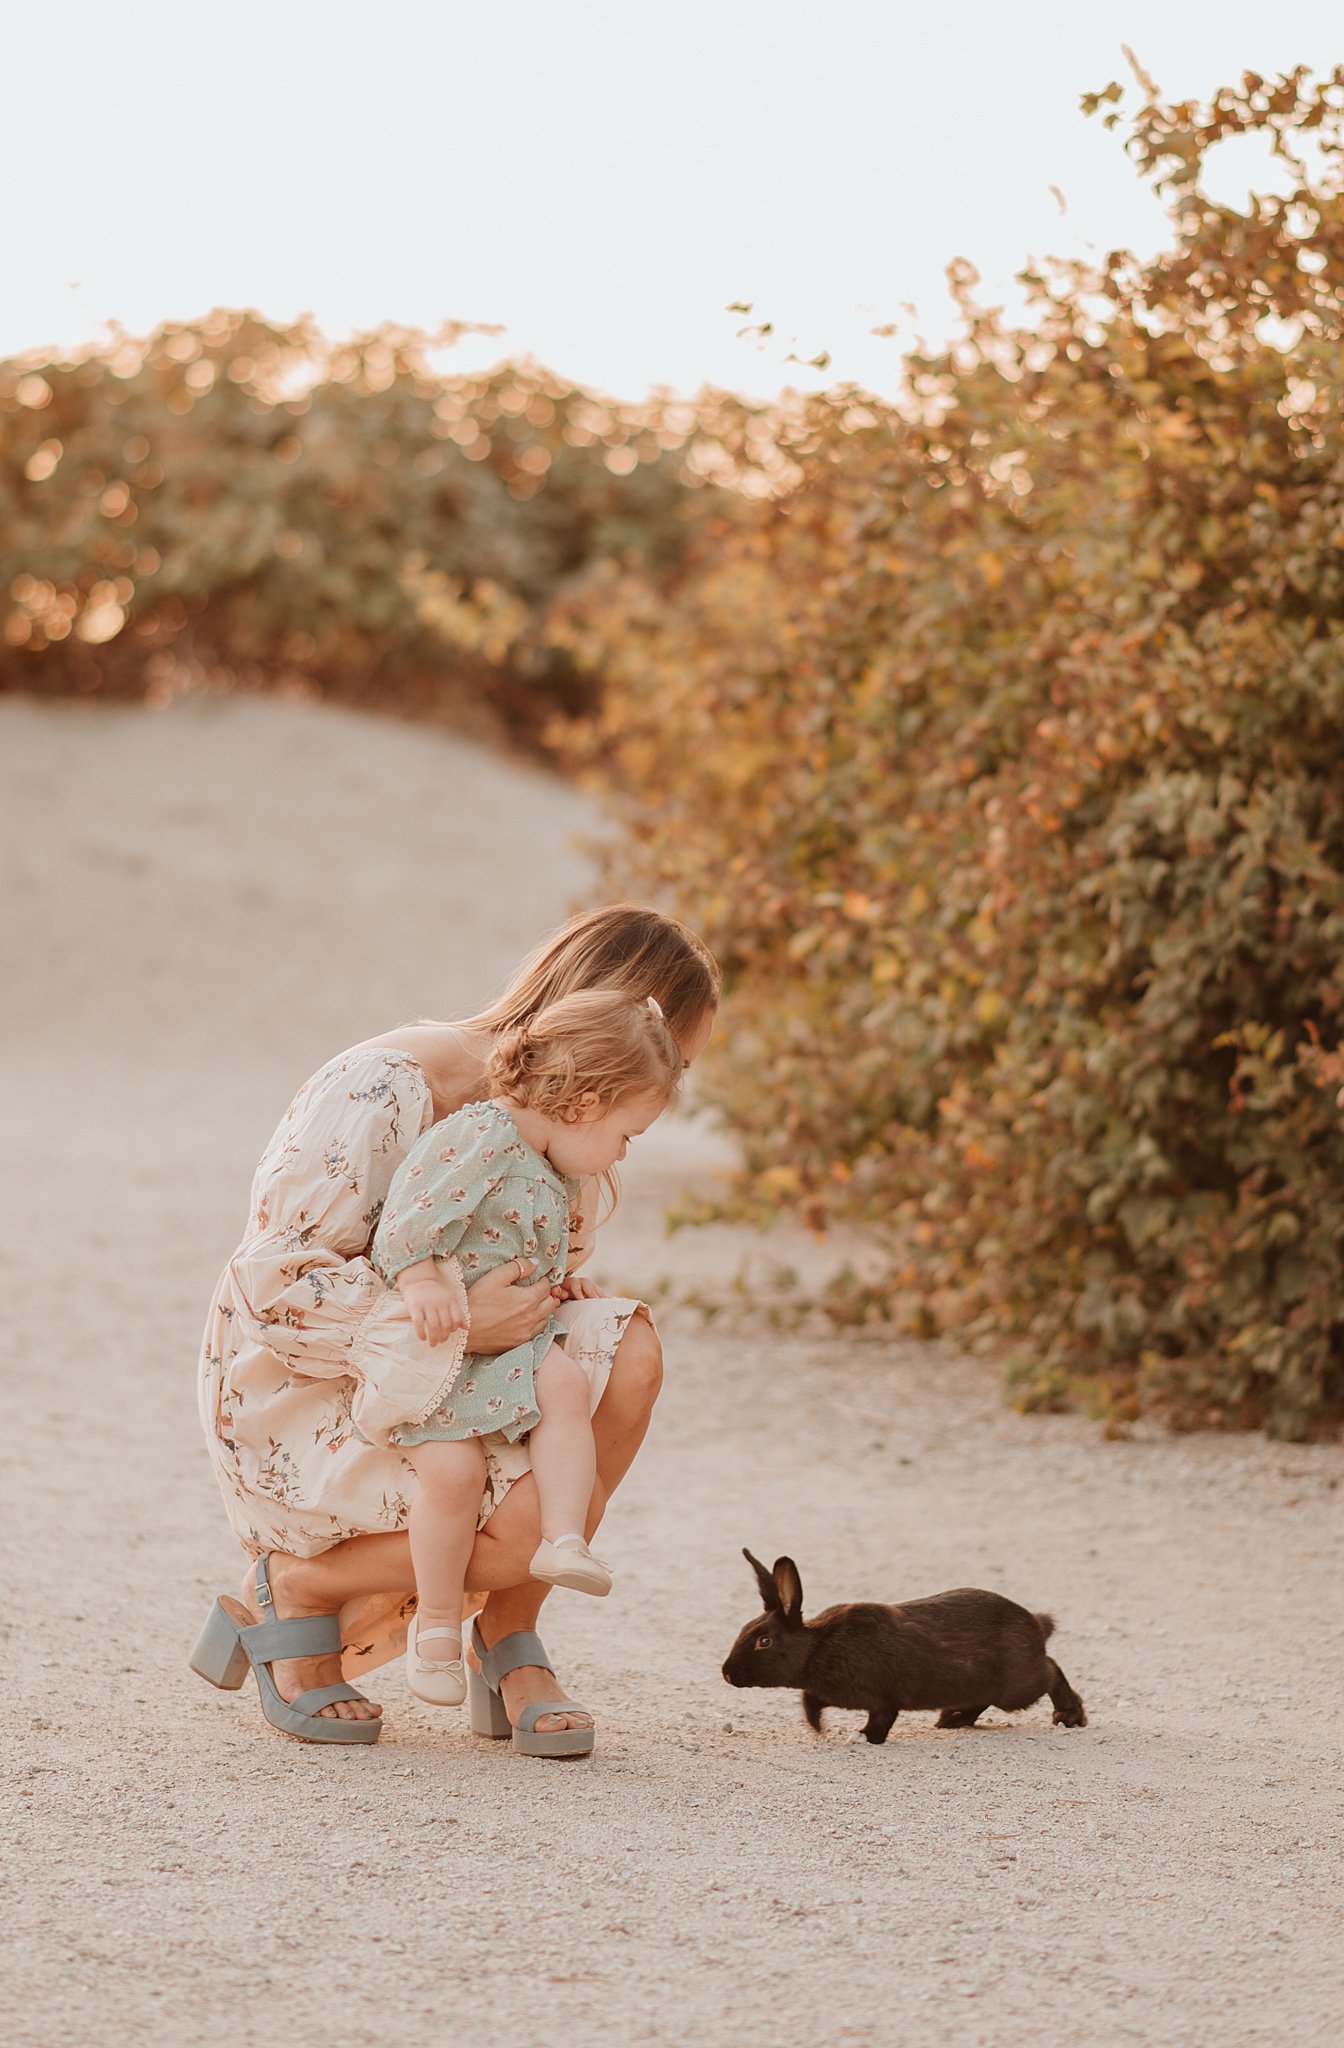 A mother shows her toddler daughter a black bunny in a park trail at sunset during baby activities vancouver